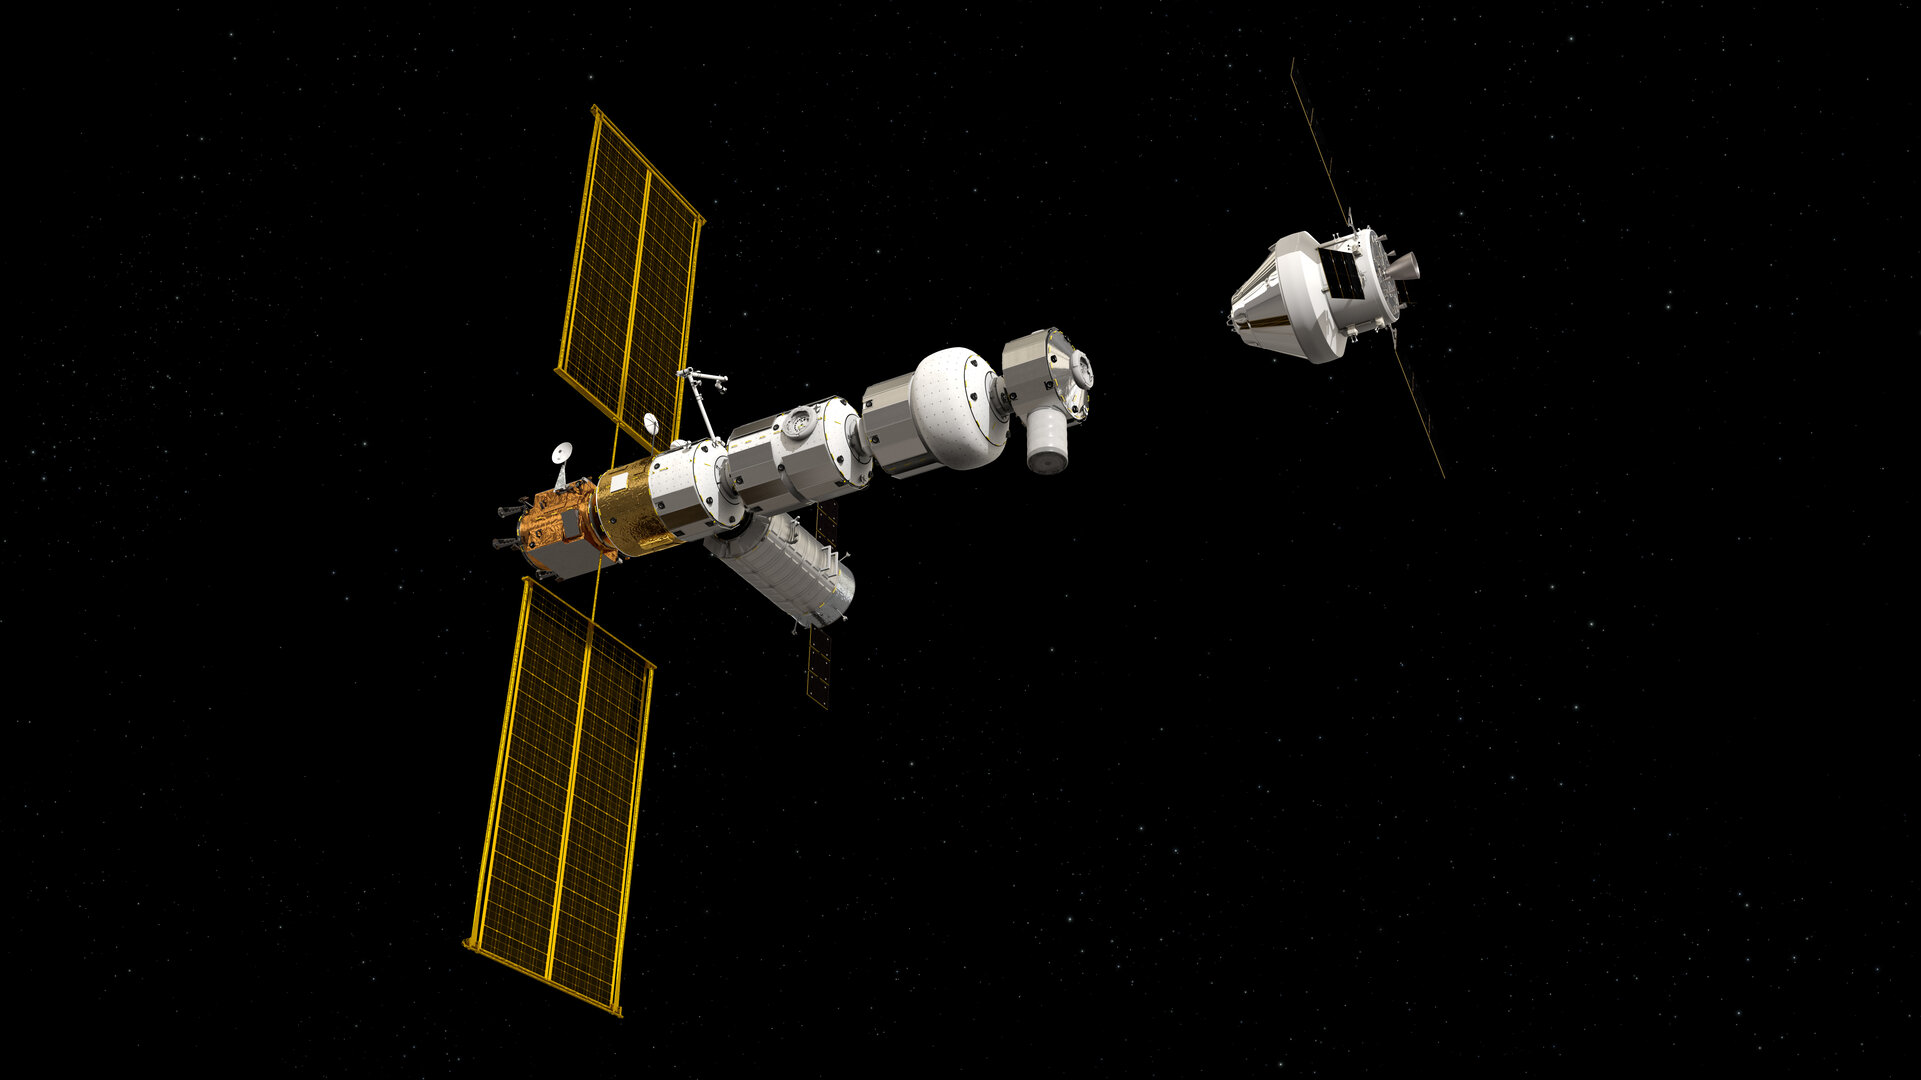 Gateway with Orion docking